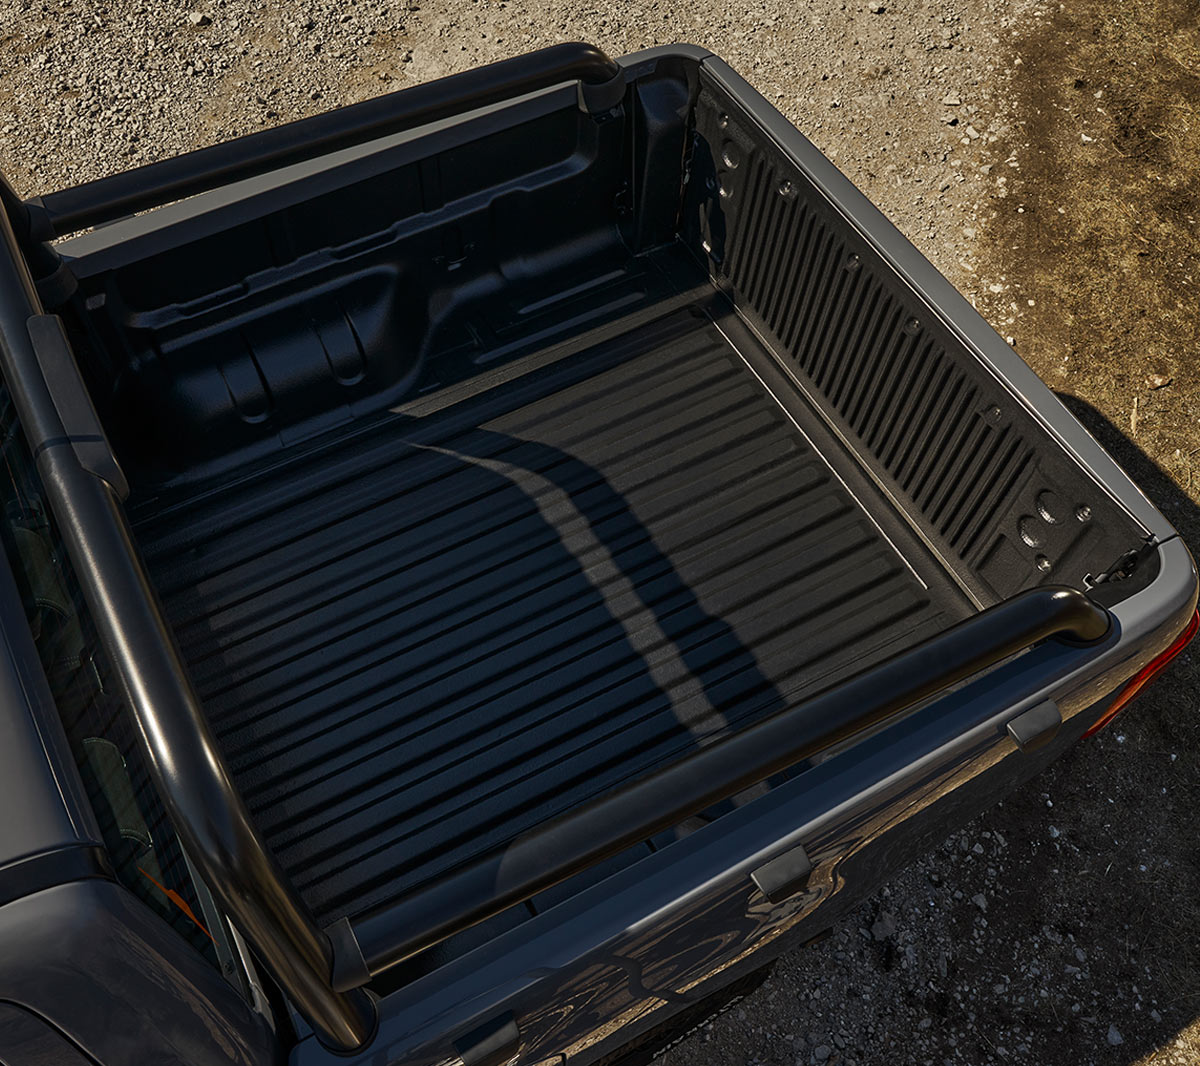 Ford Ranger Wolftrak overhead view of rear bed